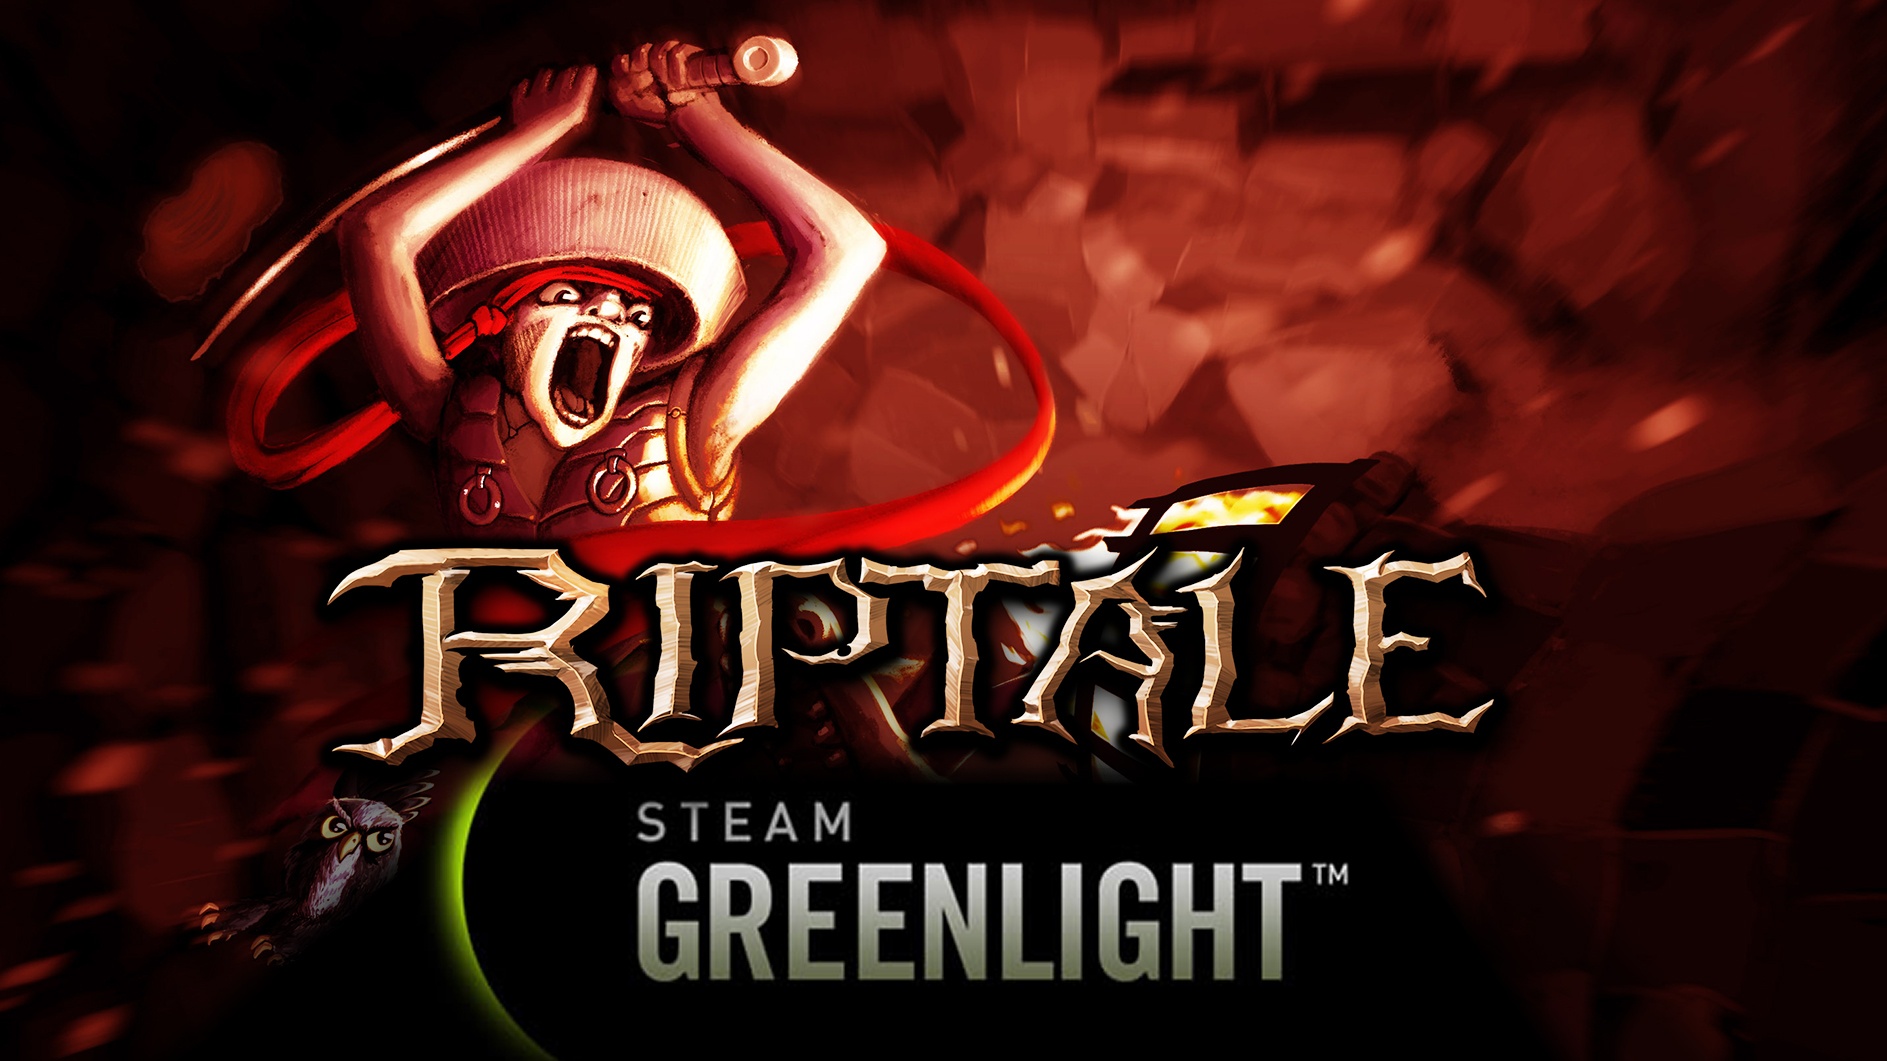 Steam and greenlight фото 23